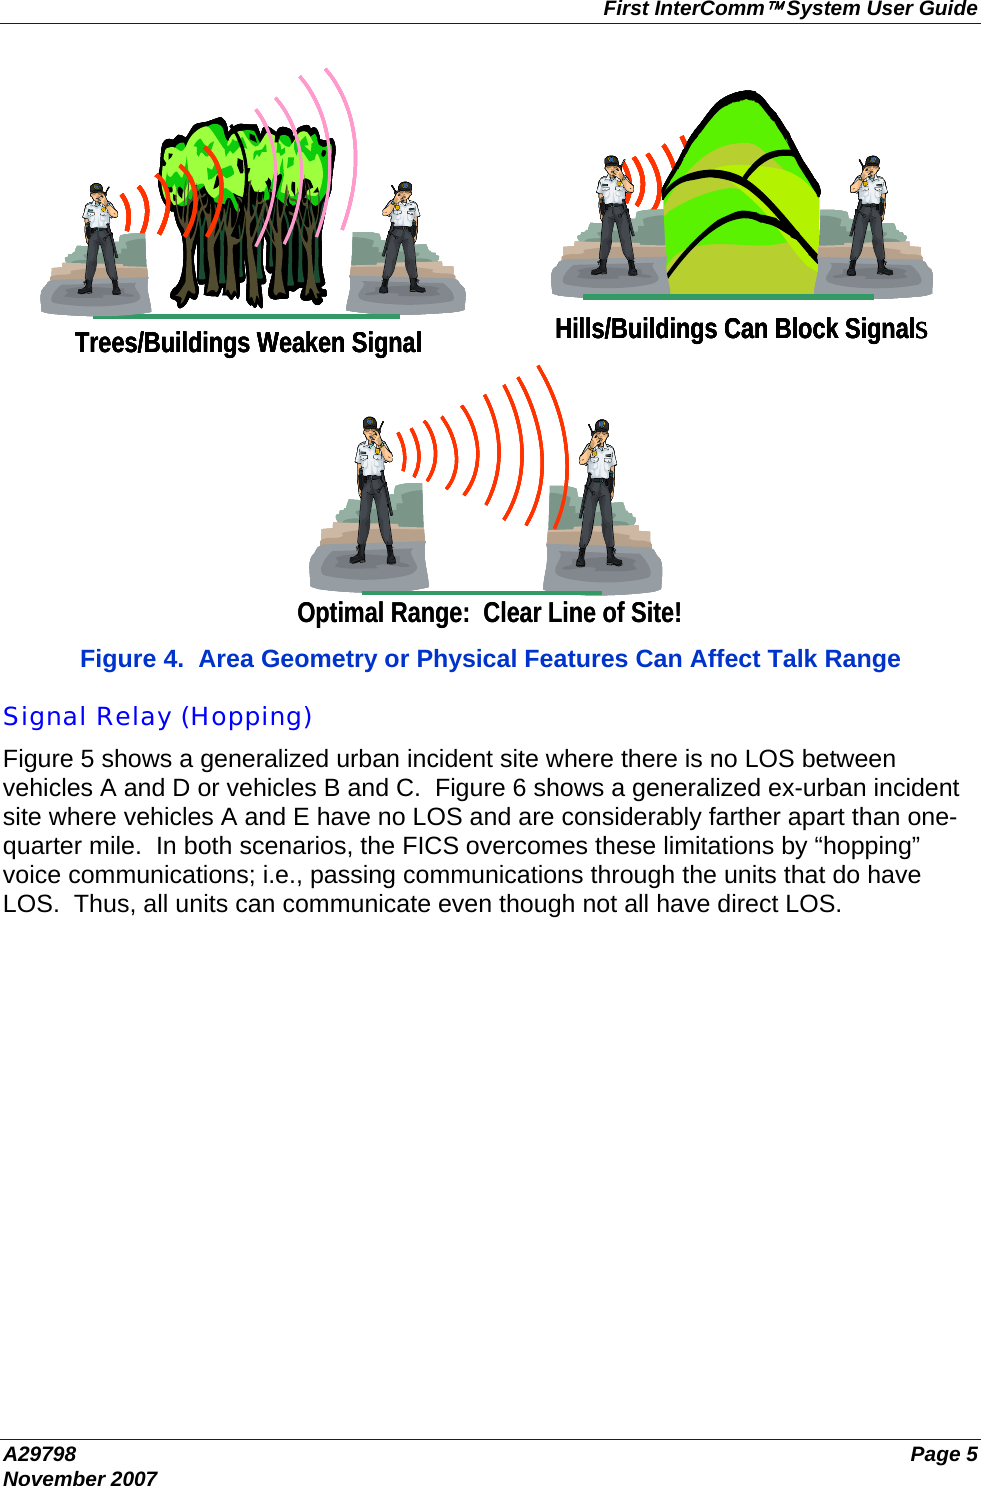 First InterComm™ System User Guide A29798  Page 5 November 2007 Trees/Buildings Weaken Signal Hills/Buildings Can Block SignalsOptimal Range:  Clear Line of Site!Trees/Buildings Weaken Signal Hills/Buildings Can Block SignalsTrees/Buildings Weaken SignalTrees/Buildings Weaken Signal Hills/Buildings Can Block SignalsHills/Buildings Can Block SignalsOptimal Range:  Clear Line of Site!  Figure 4.  Area Geometry or Physical Features Can Affect Talk Range  Signal Relay (Hopping) Figure 5 shows a generalized urban incident site where there is no LOS between vehicles A and D or vehicles B and C.  Figure 6 shows a generalized ex-urban incident site where vehicles A and E have no LOS and are considerably farther apart than one-quarter mile.  In both scenarios, the FICS overcomes these limitations by “hopping” voice communications; i.e., passing communications through the units that do have LOS.  Thus, all units can communicate even though not all have direct LOS. 